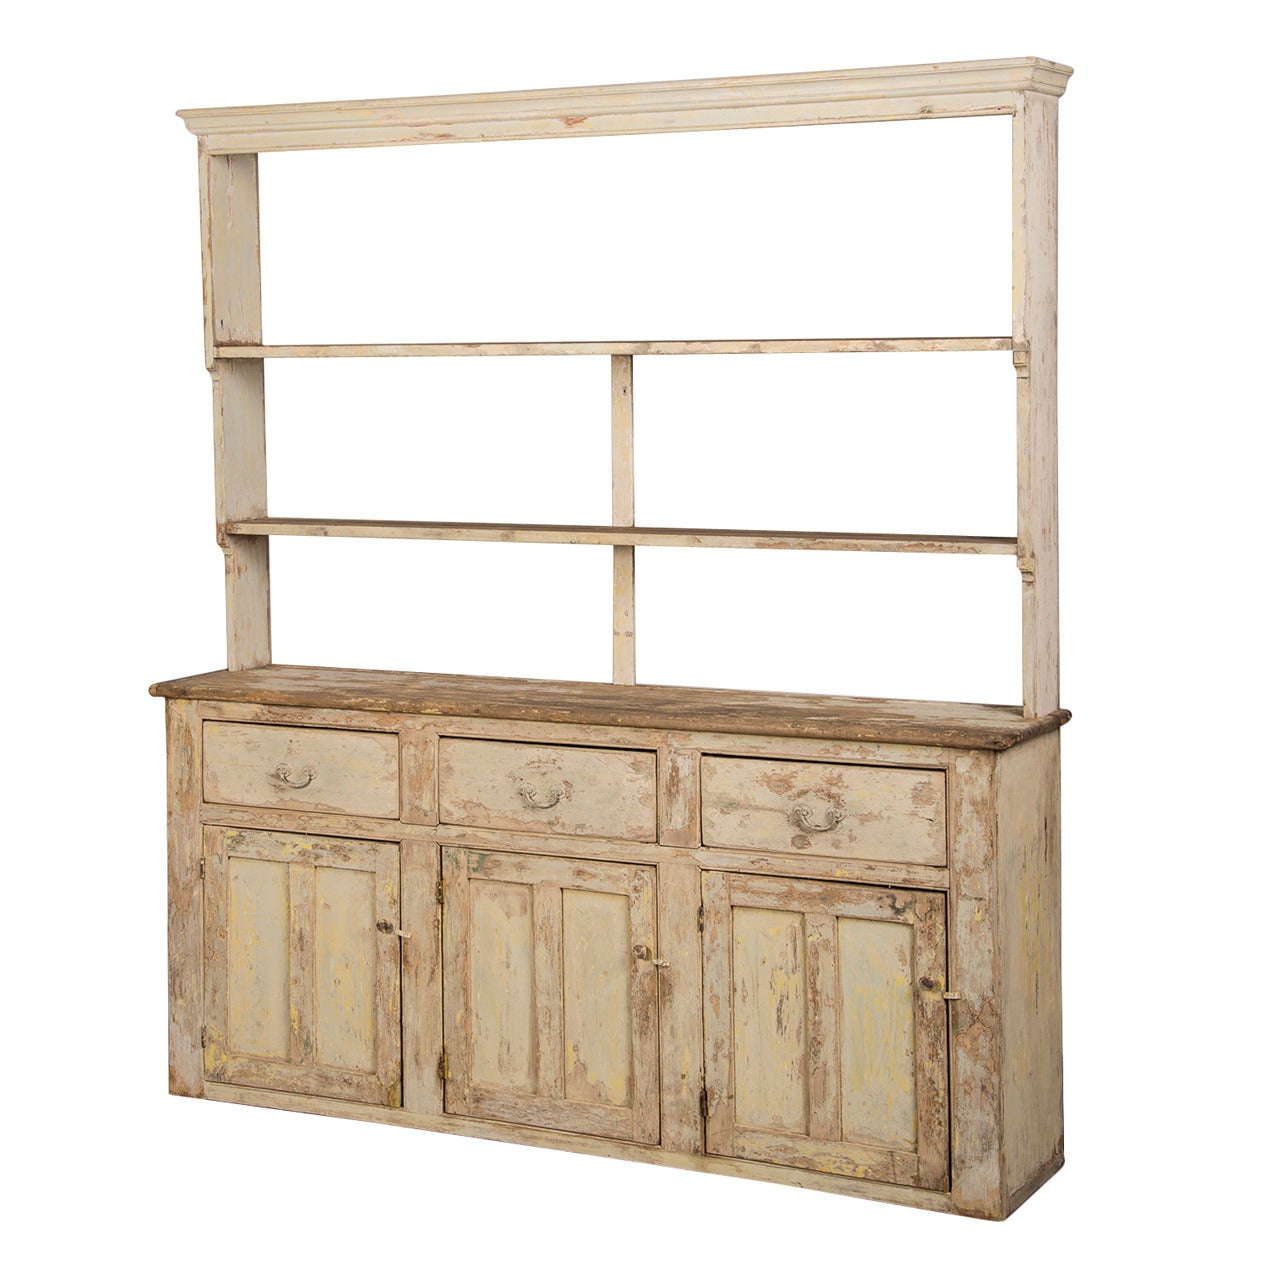 Antique English Welsh Dresser, Original Painted Finish, from Bath circa 1850 For Sale